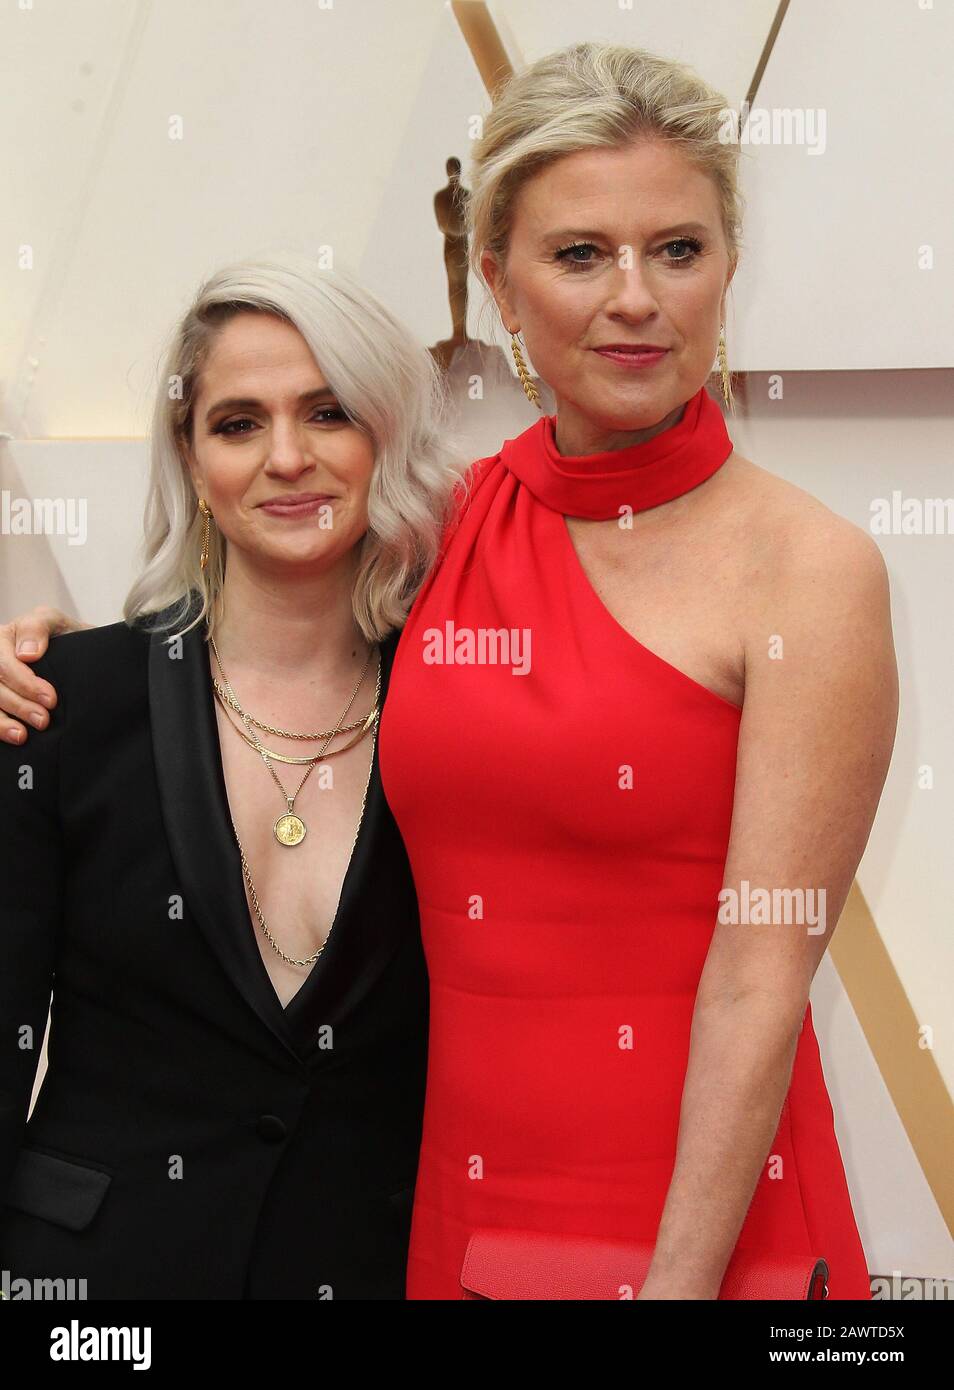 09 February 2020 - Hollywood, California - Jenno Topping. 92nd Annual Academy Awards presented by the Academy of Motion Picture Arts and Sciences held at Hollywood & Highland Center. (Credit Image: © AdMedia via ZUMA Wire) Stock Photo